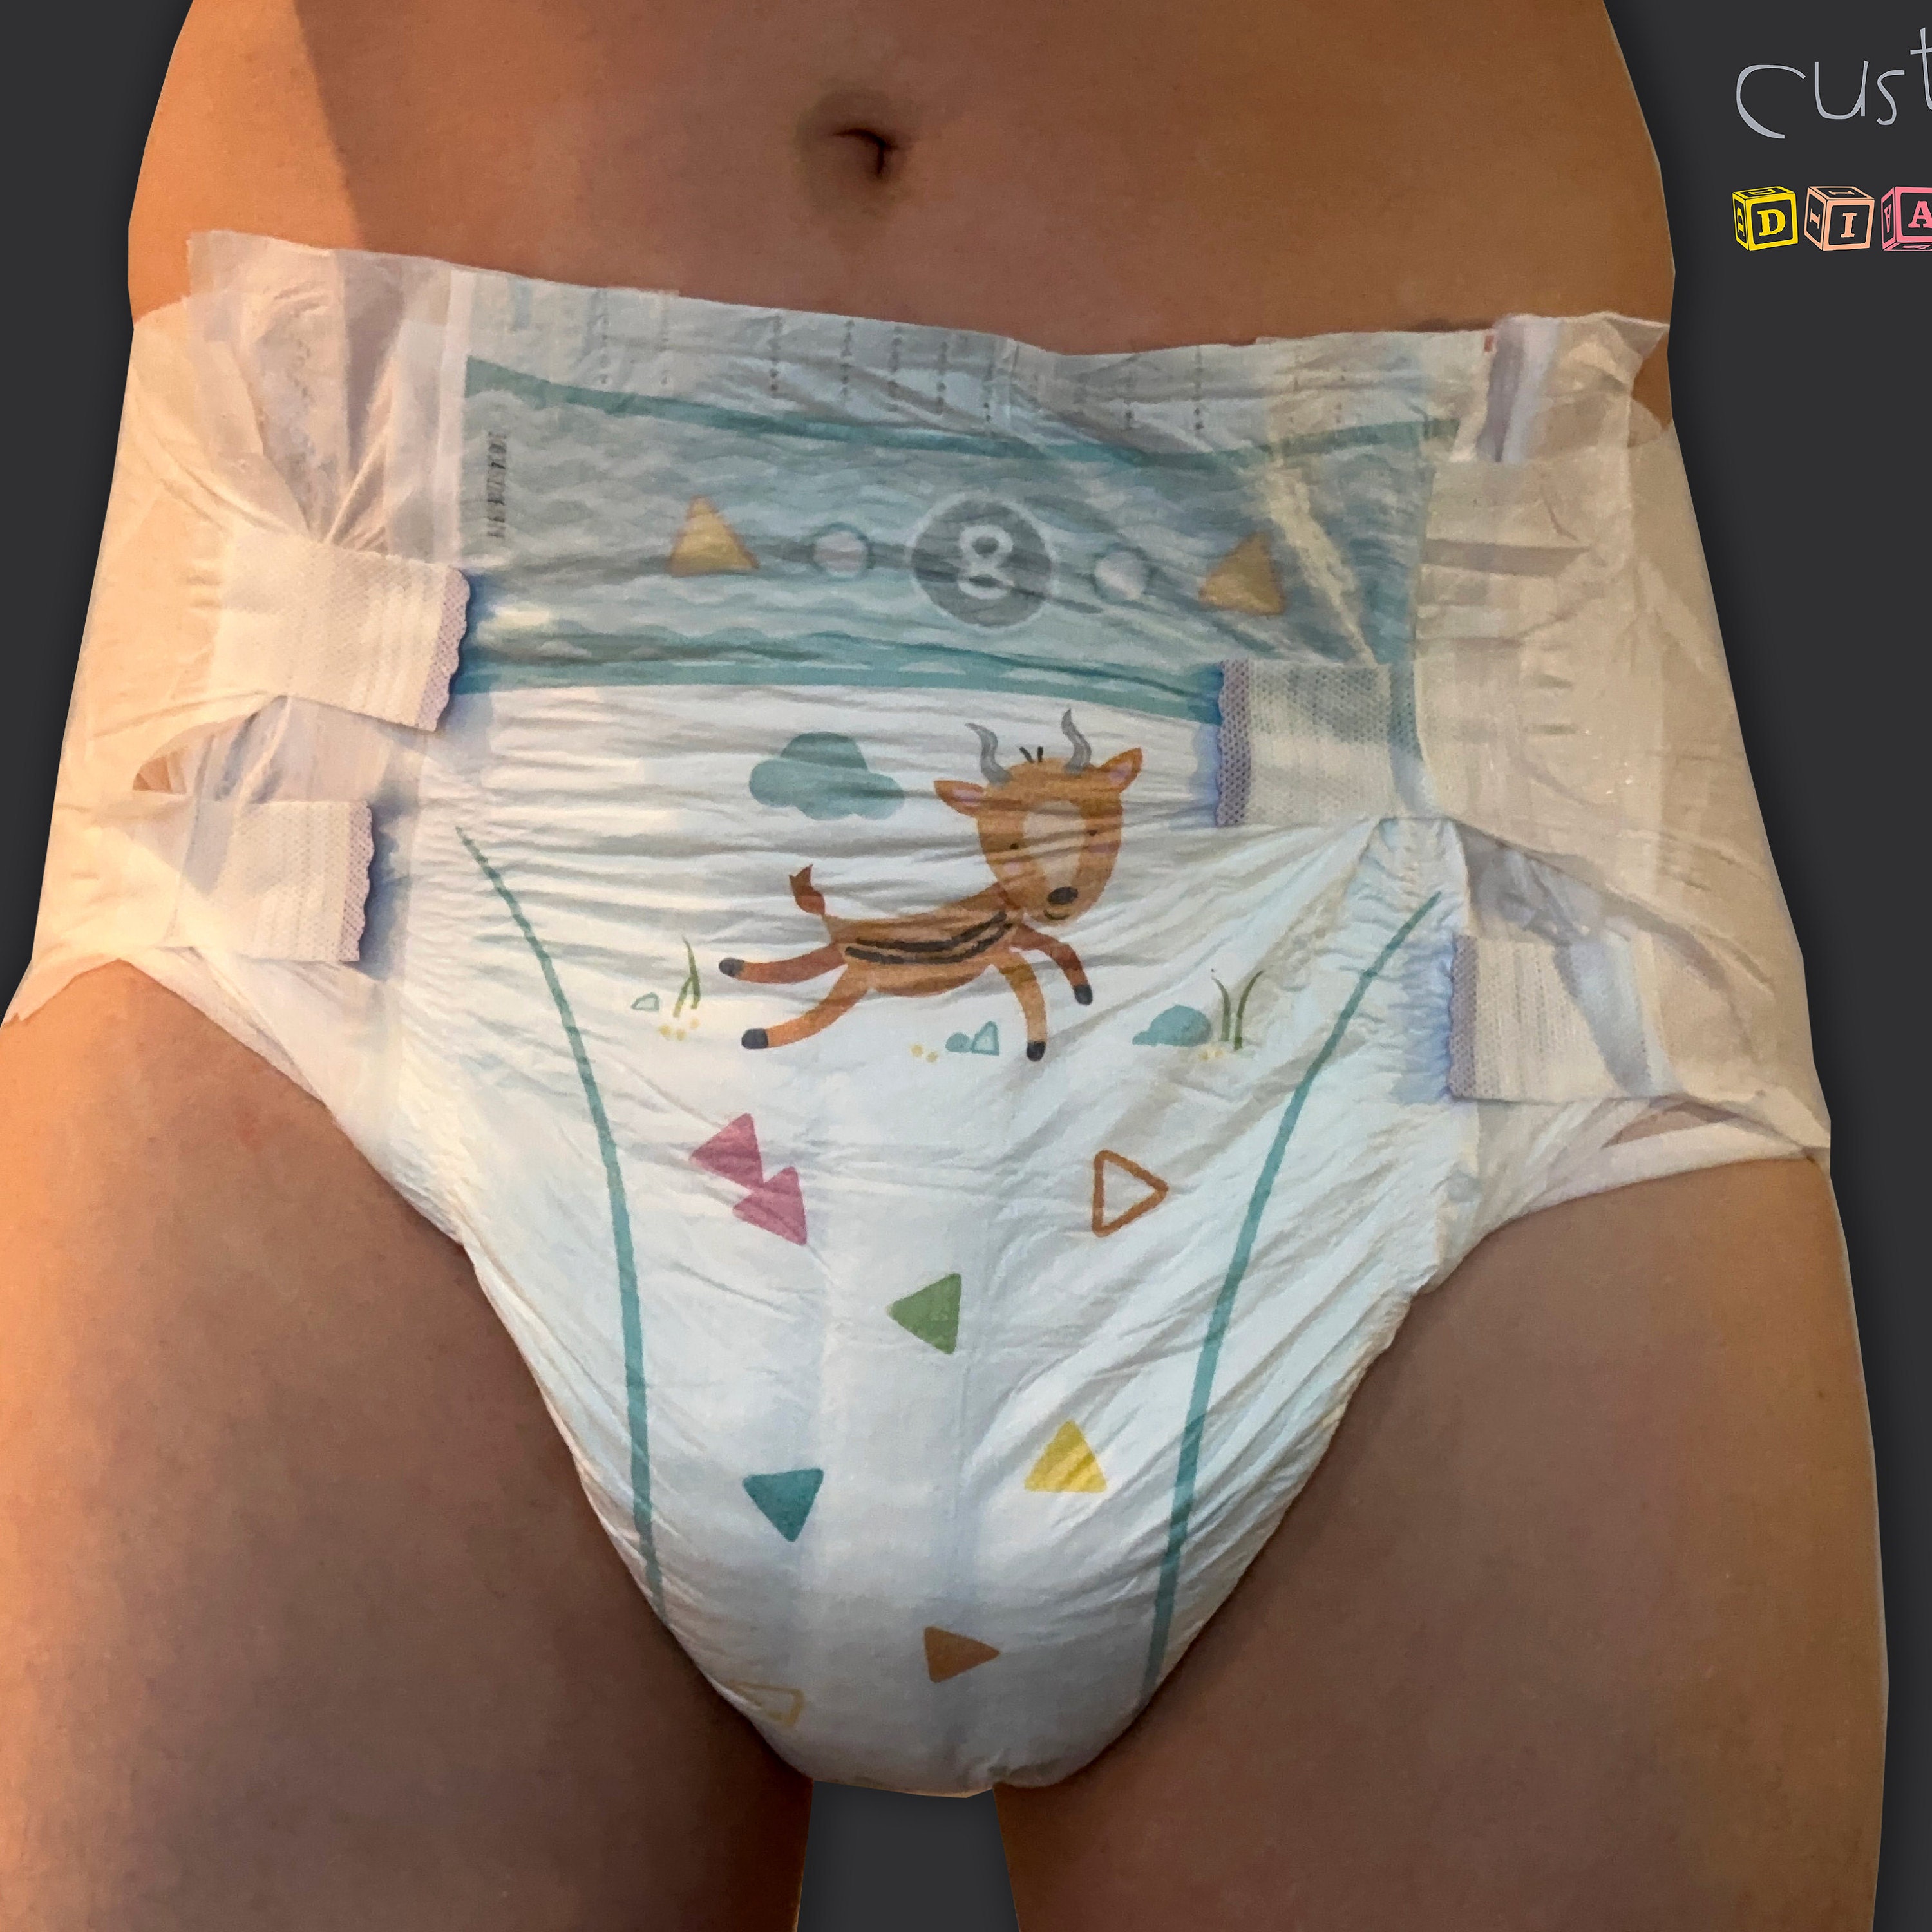 CustomZ Mr Mouse ABDL Adult Baby Pull Up Diaper - 1 x Pull Up Nappy